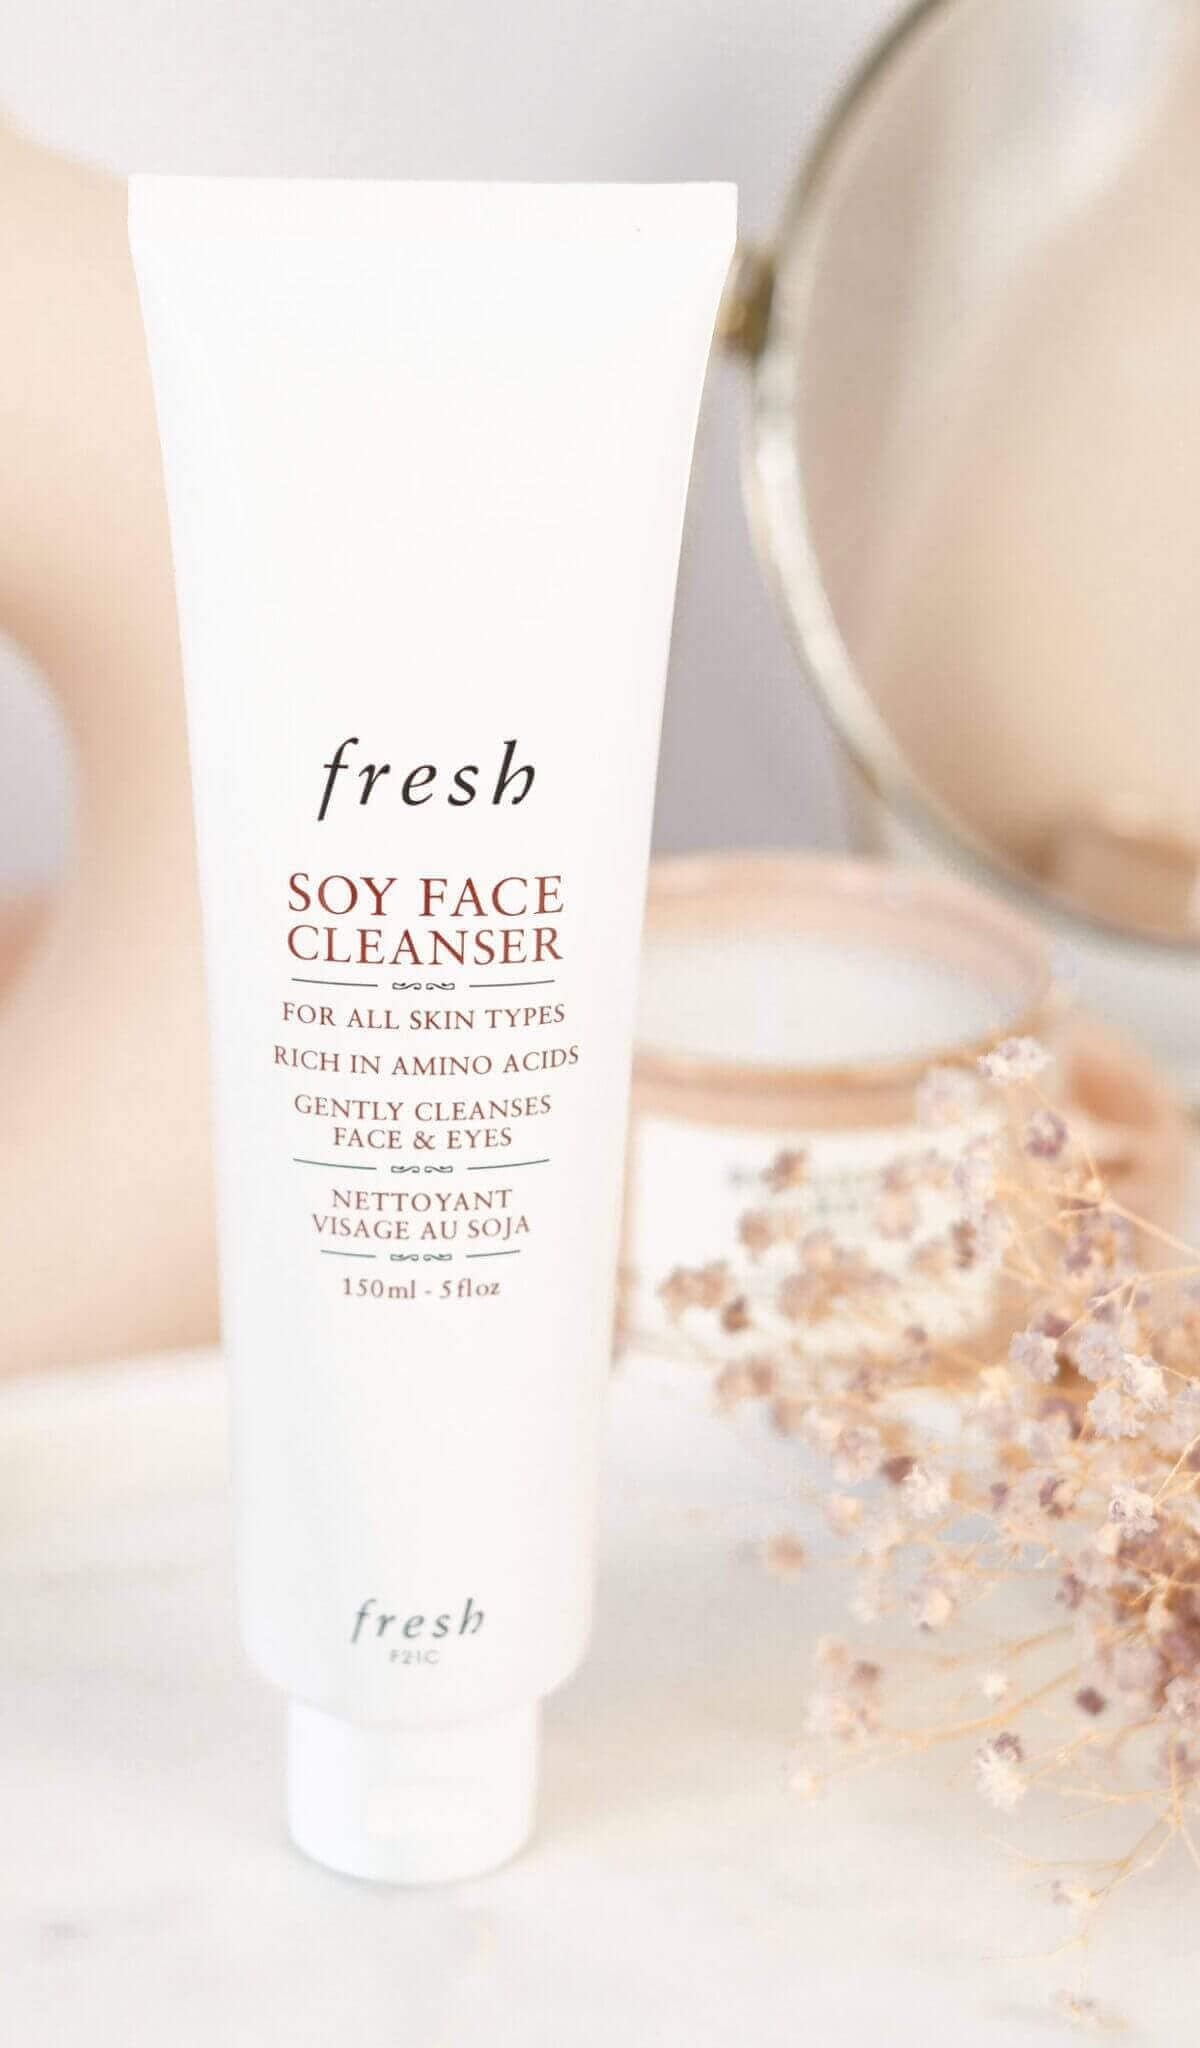 The #1 Best-Selling Fresh Soy Face Cleanser Tested ⋆ Beautymone